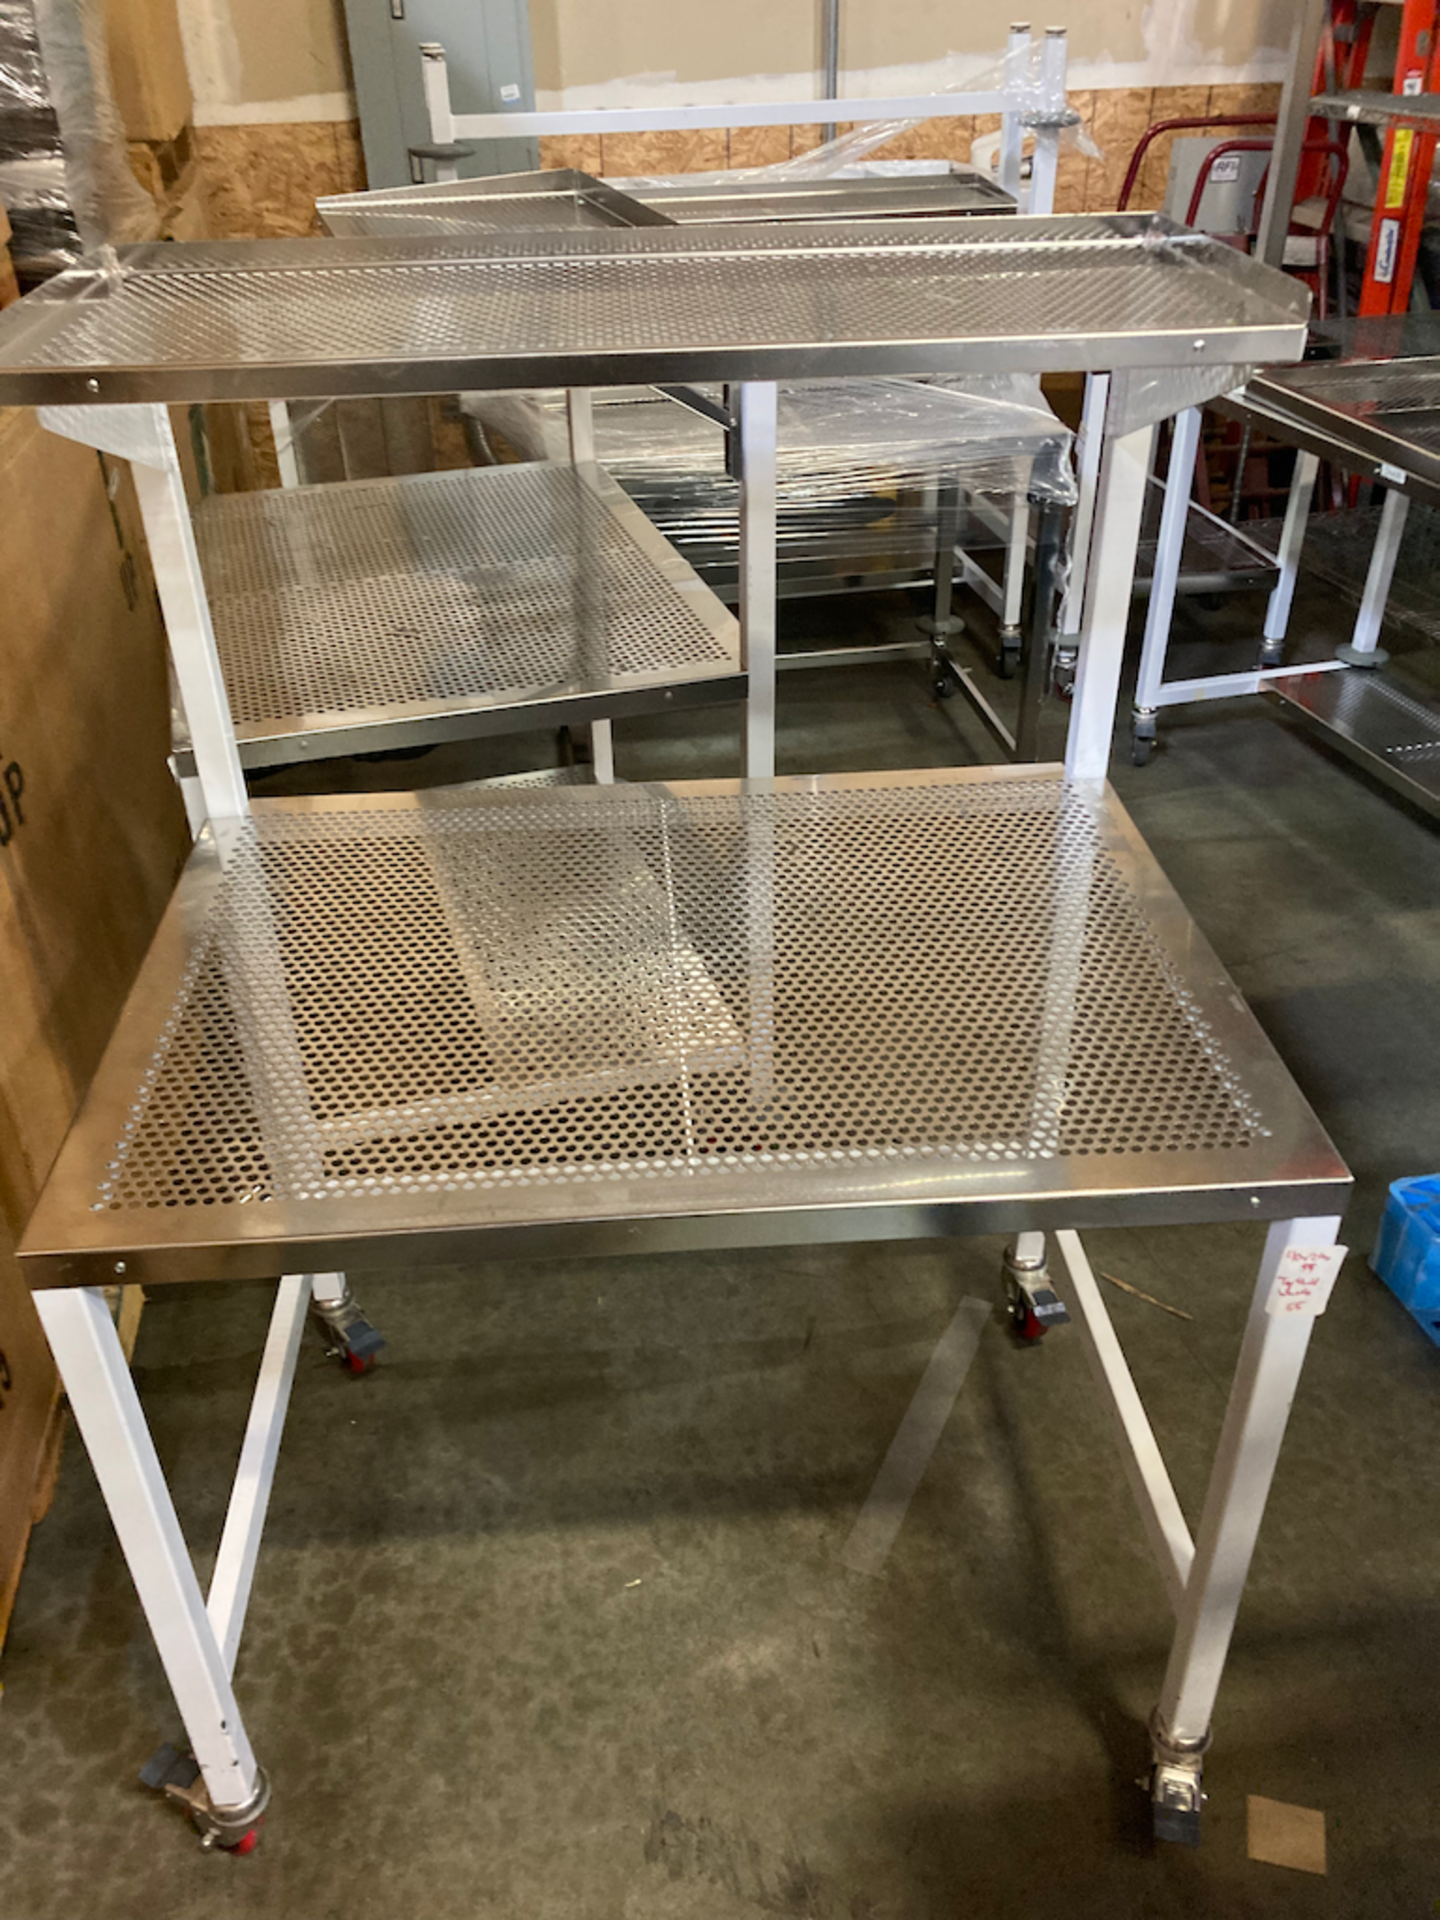 40 x 29 x 58 Perforated Stainless Steel Cleanroom Table Wheels, Top Shelf - Image 3 of 3